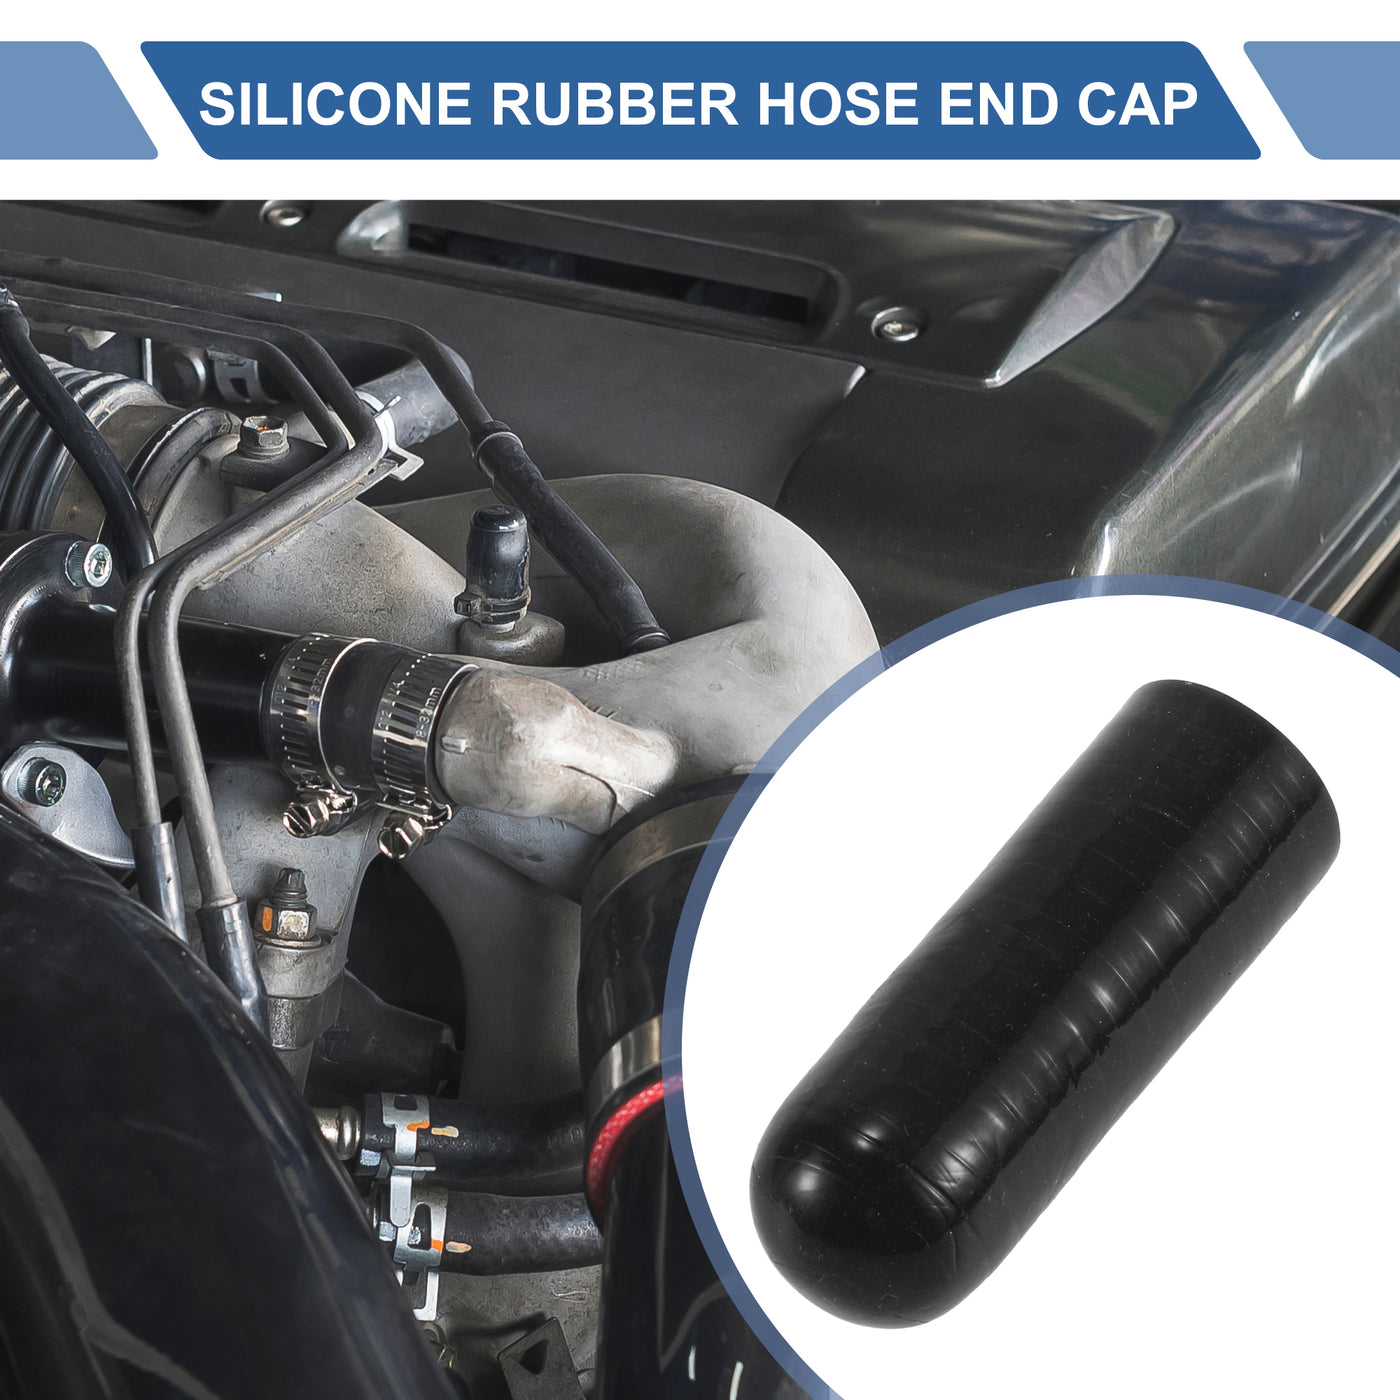 X AUTOHAUX 1 Pcs 60mm Length 18mm/0.71" ID Black Car Silicone Rubber Hose End Cap with Clamp Silicone Reinforced Blanking Cap for Bypass Tube Universal